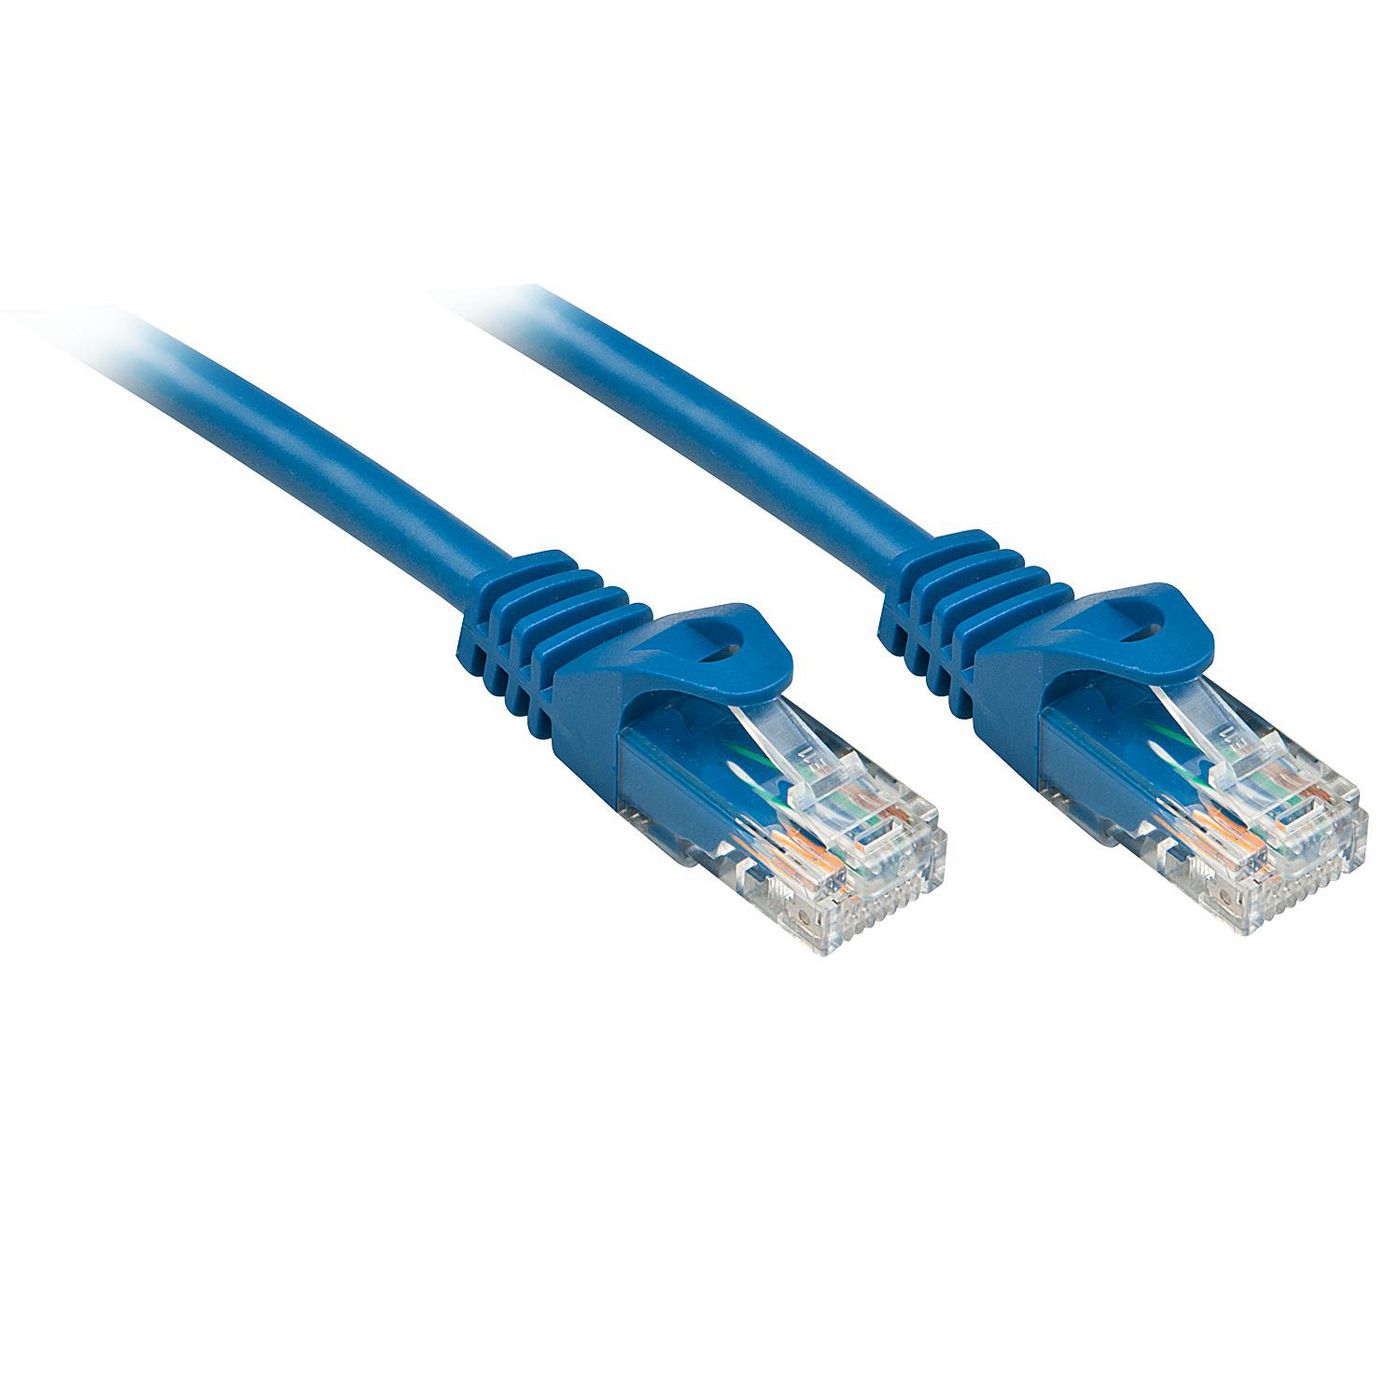 Lindy 48172 W128370568 Networking Cable Blue 1 M 